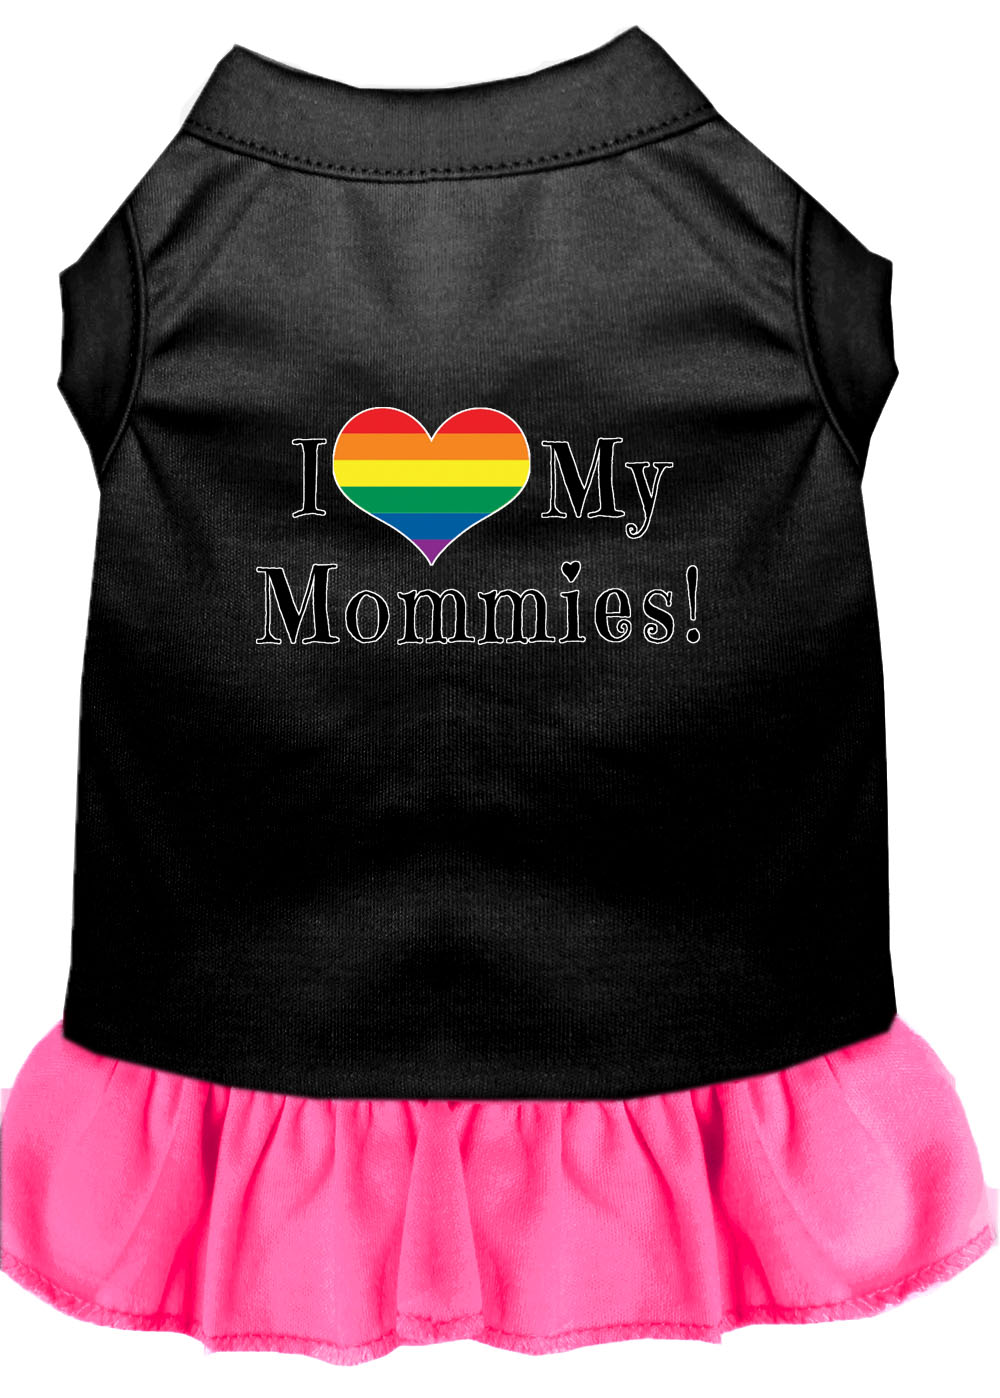 I Heart my Mommies Screen Print Dog Dress Black with Bright Pink Med